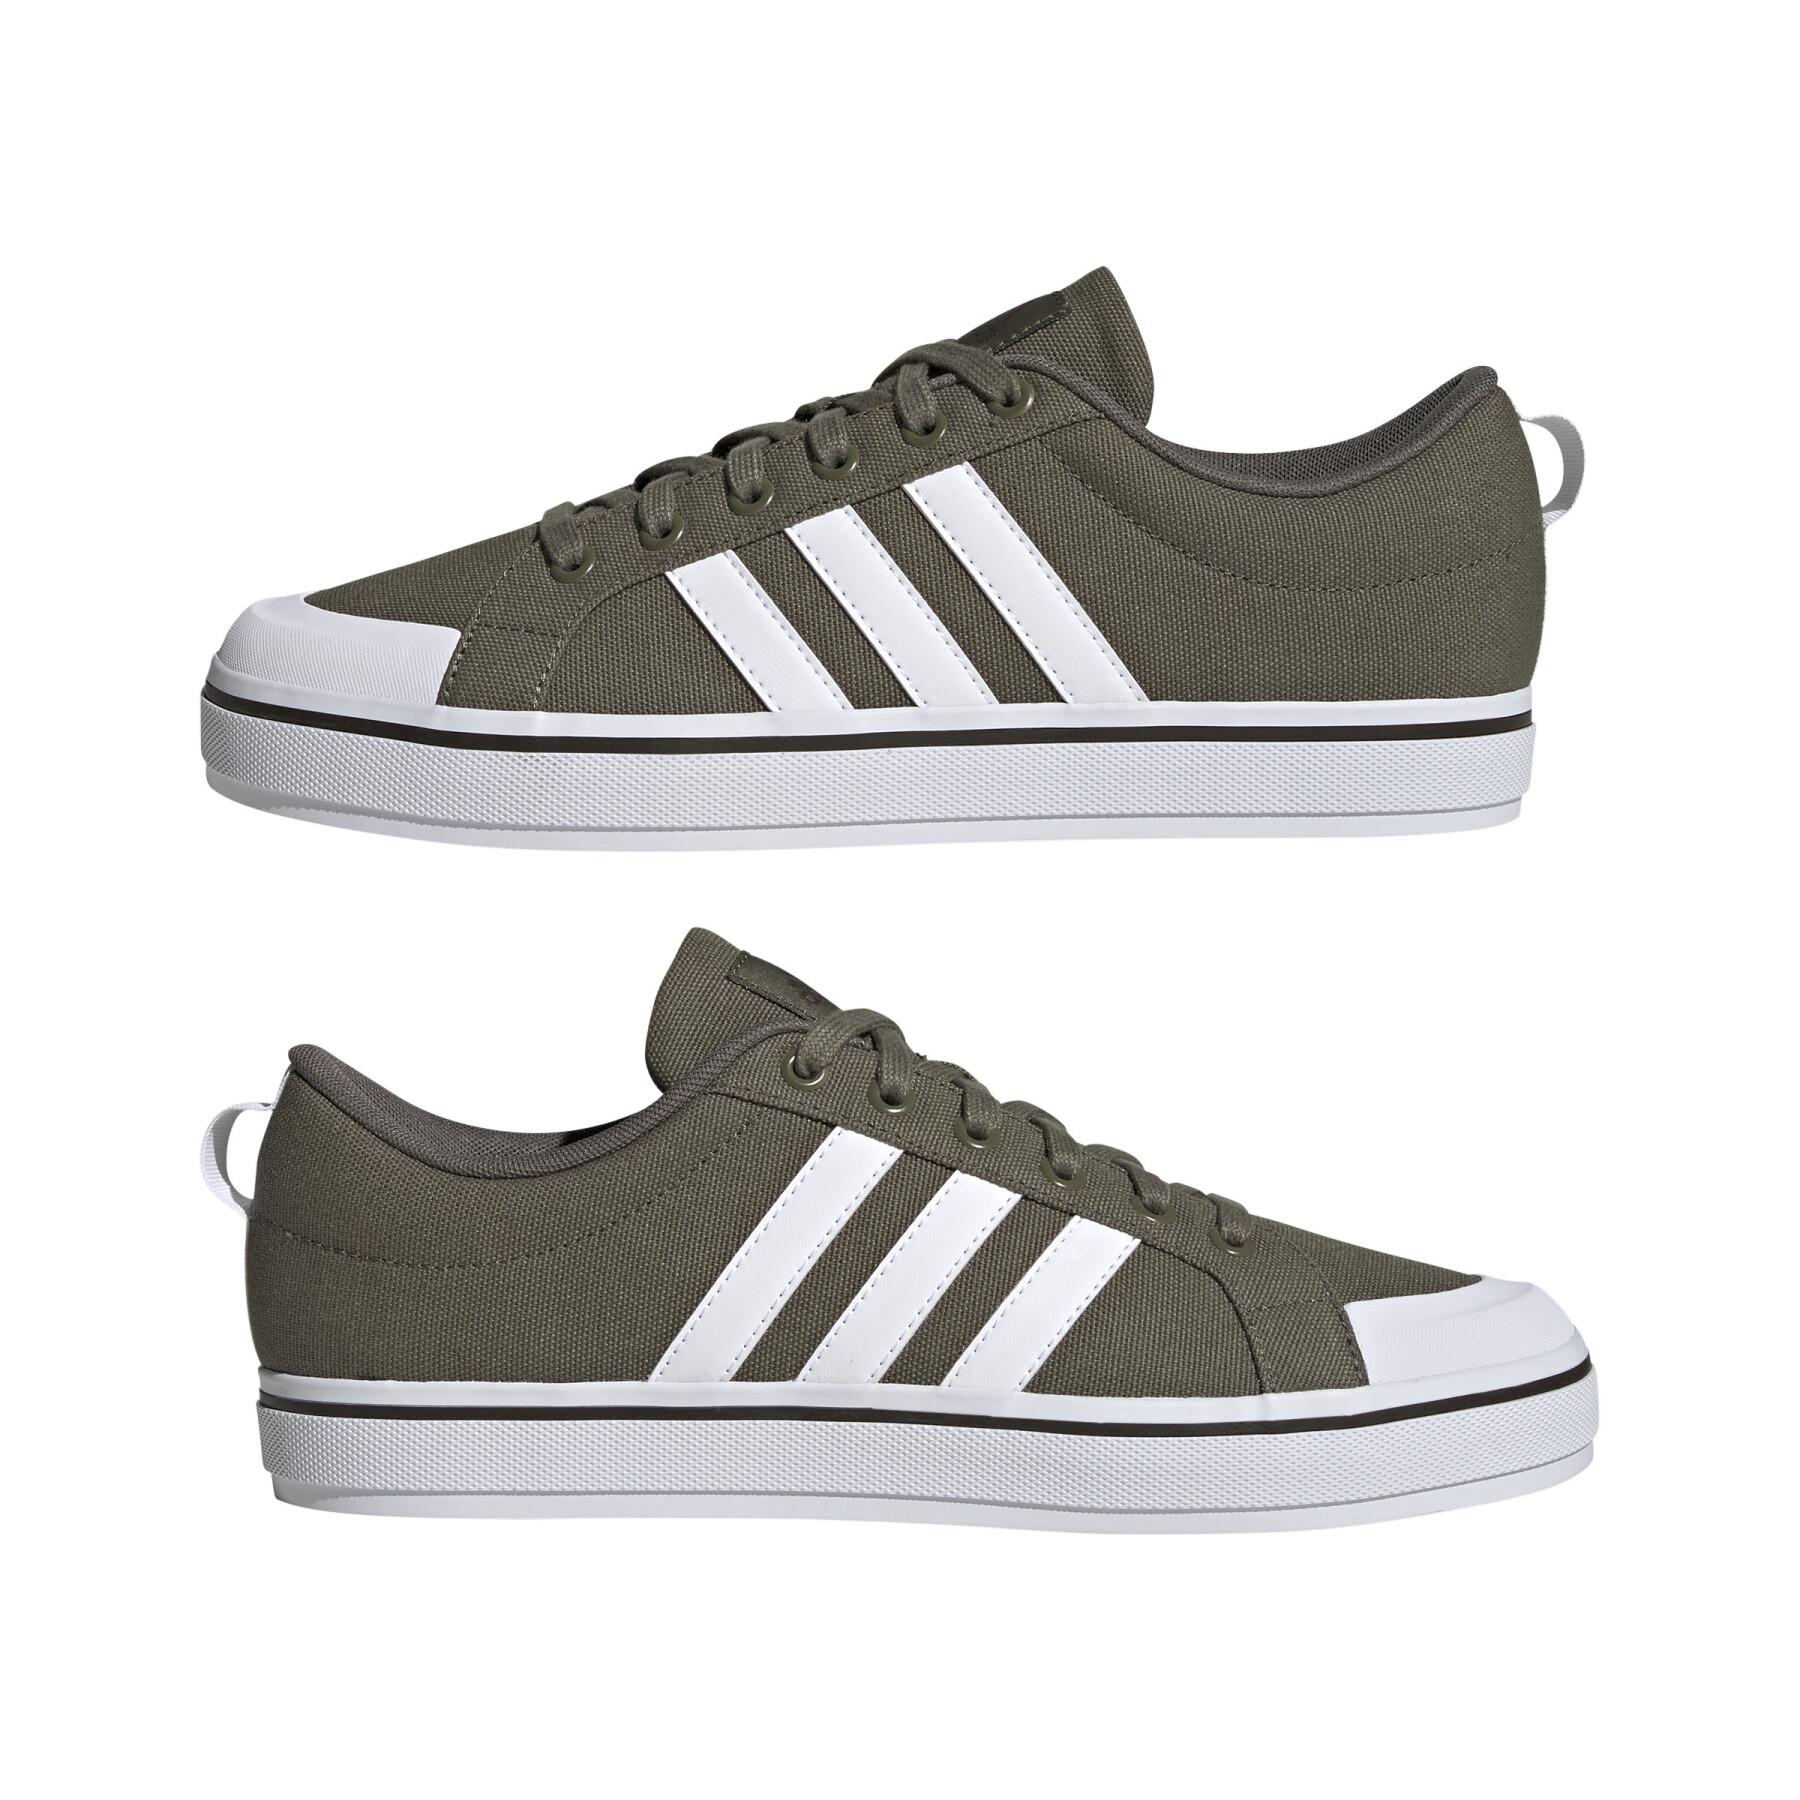 Trainers adidas Vl Court 2.0